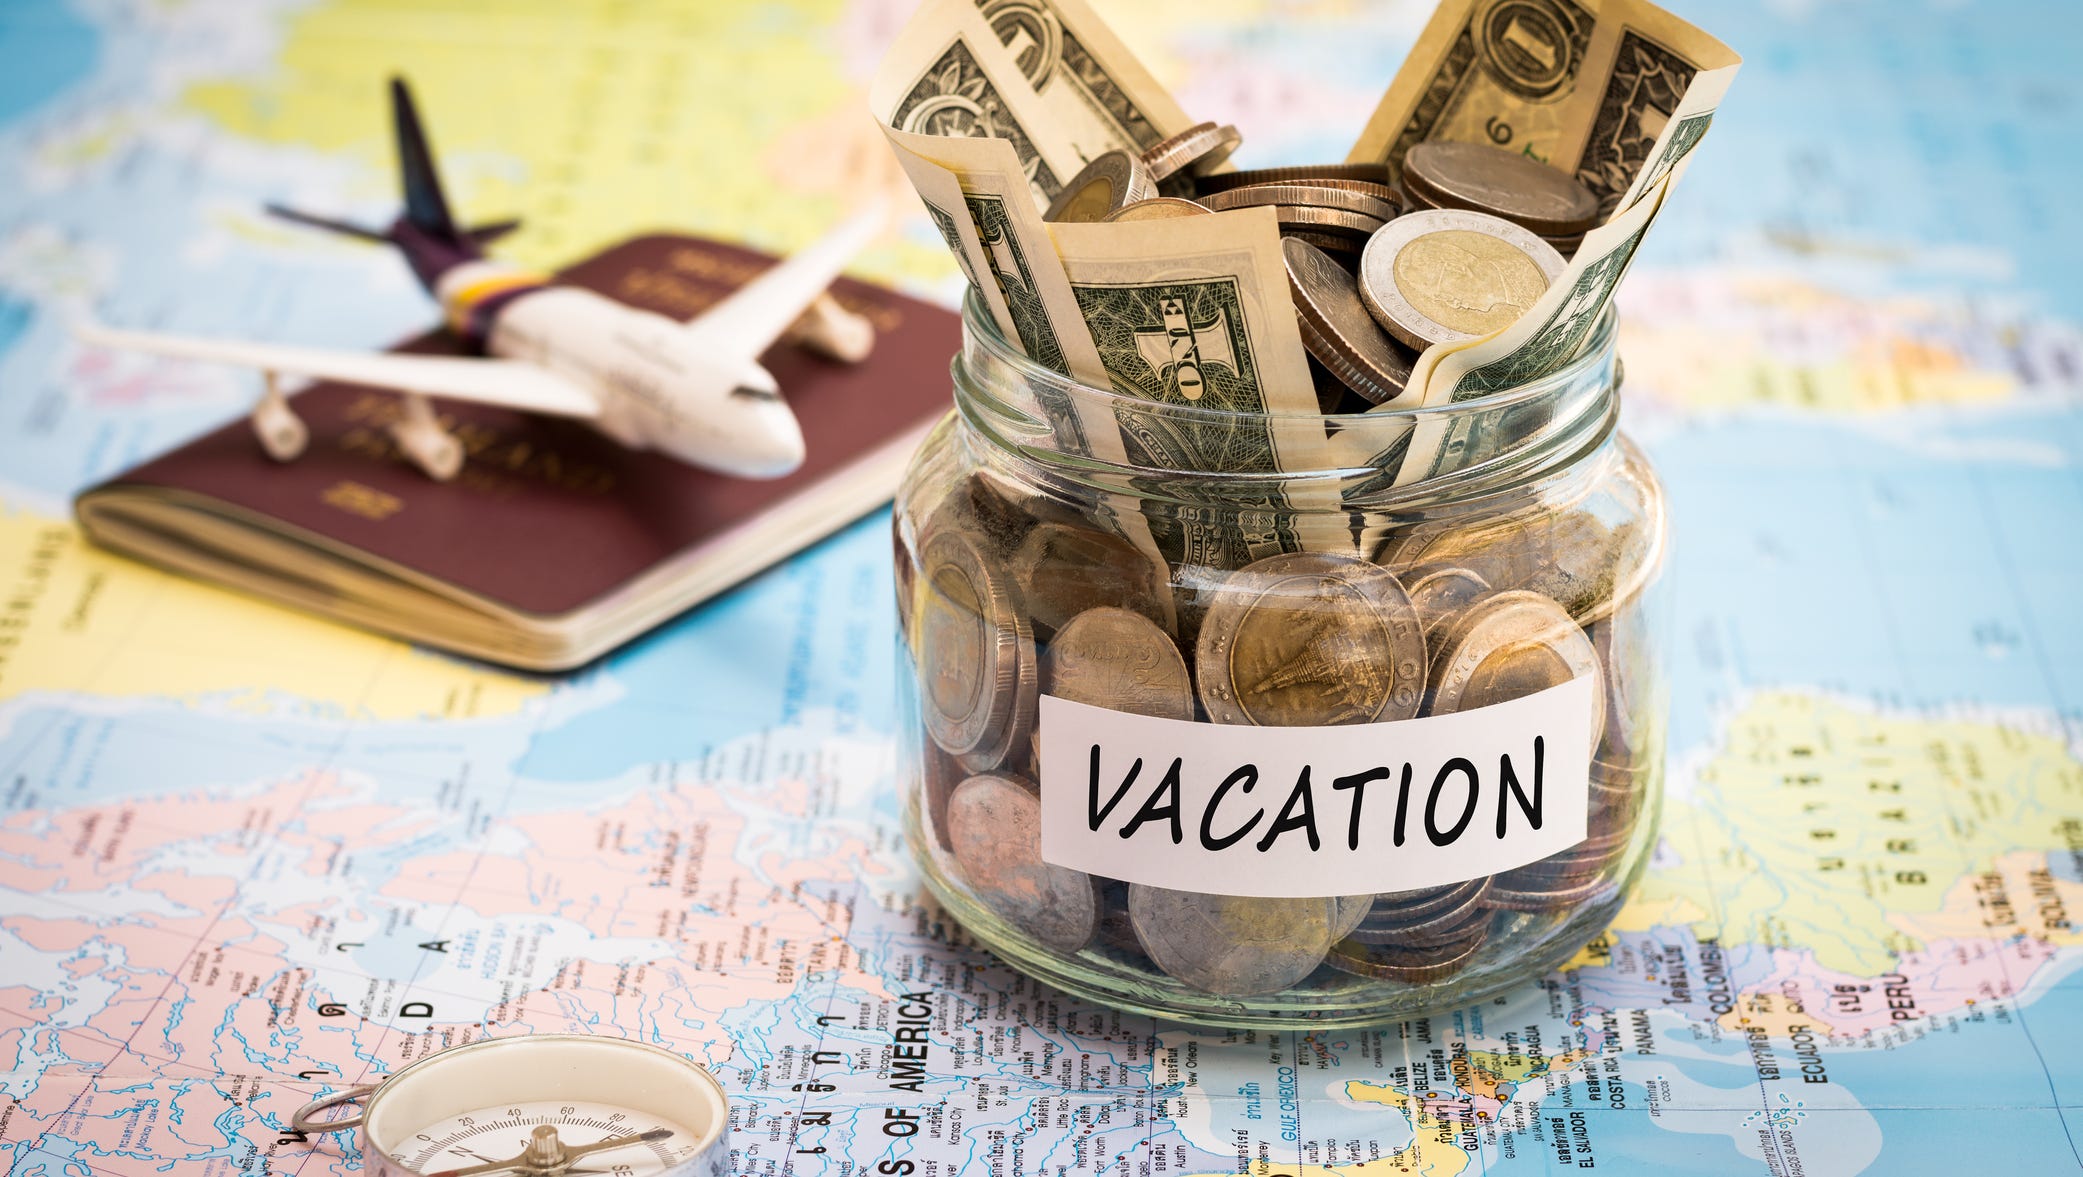 Planning a vacation? Here are 18 ways to save for your upcoming one